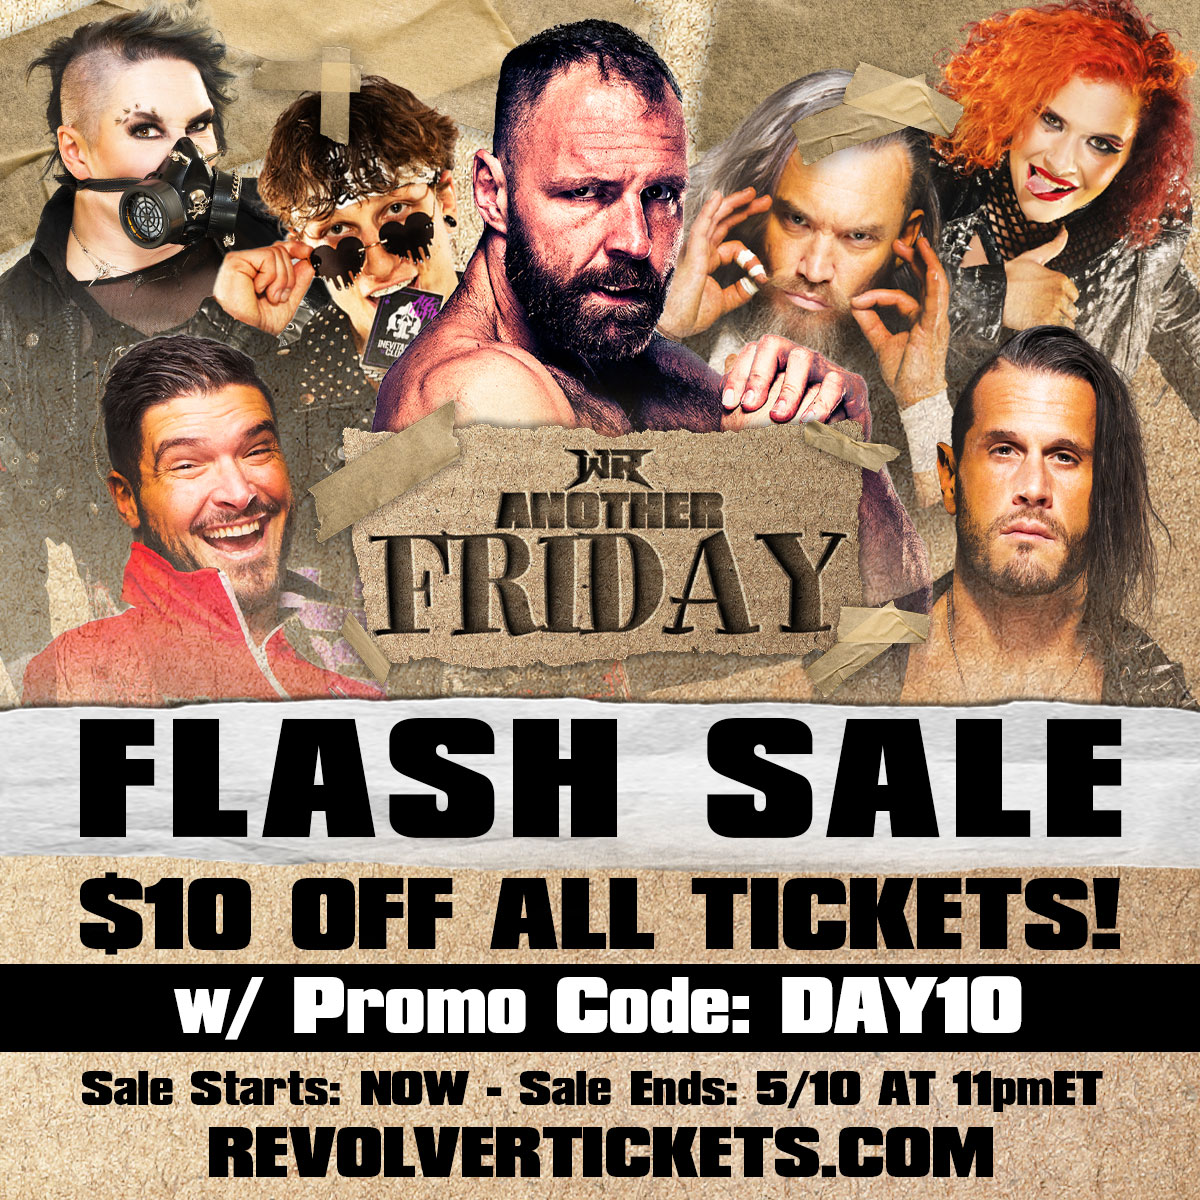 [ FLASH SALE ] $10 OFF - ALL 5/17 #RevolverFRIDAY Tickets! w/ Promo Code: DAY10 (Sale Starts: NOW - Sale Ends 5/10 at 11pmET) RevolverTickets.com